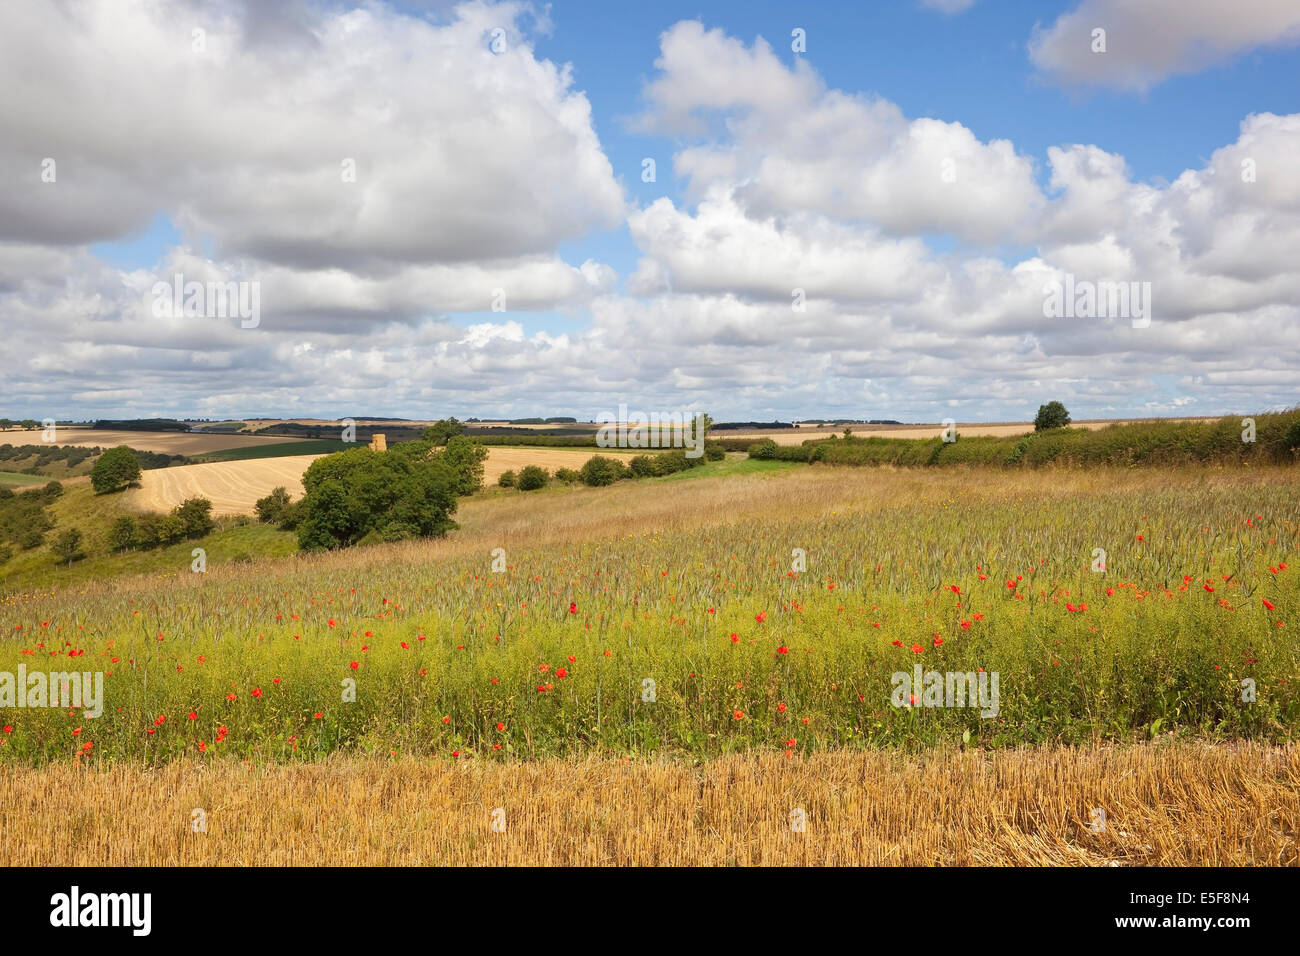 Annual cornfield wildflowers growing in the patchwork landscape of the Yorkshire wolds, England, under a cloudy summer sky. Stock Photo